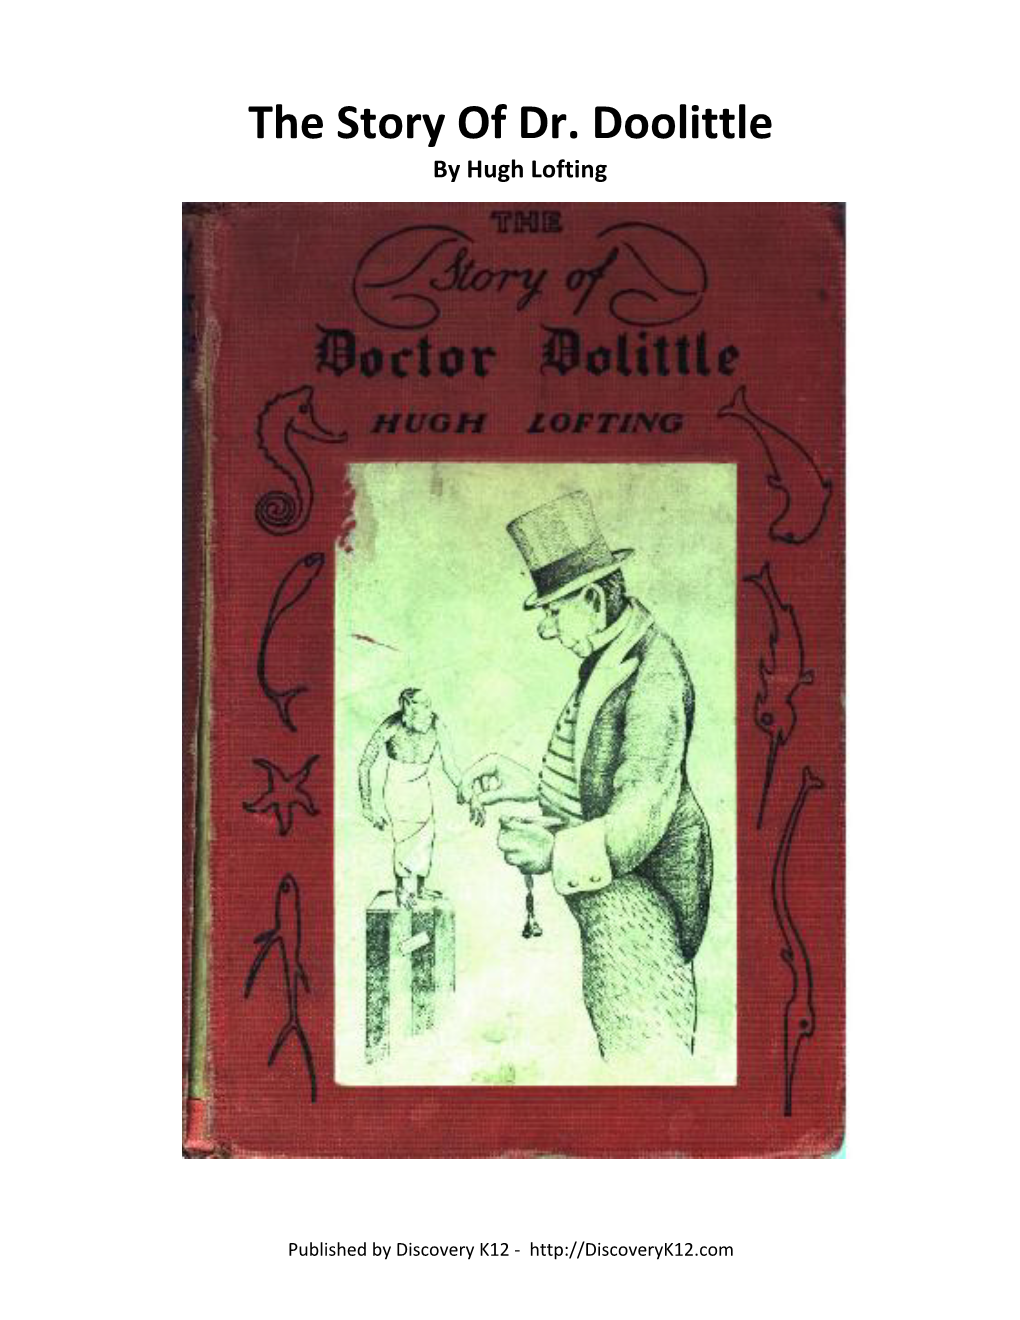 The Story of Dr. Doolittle by Hugh Lofting